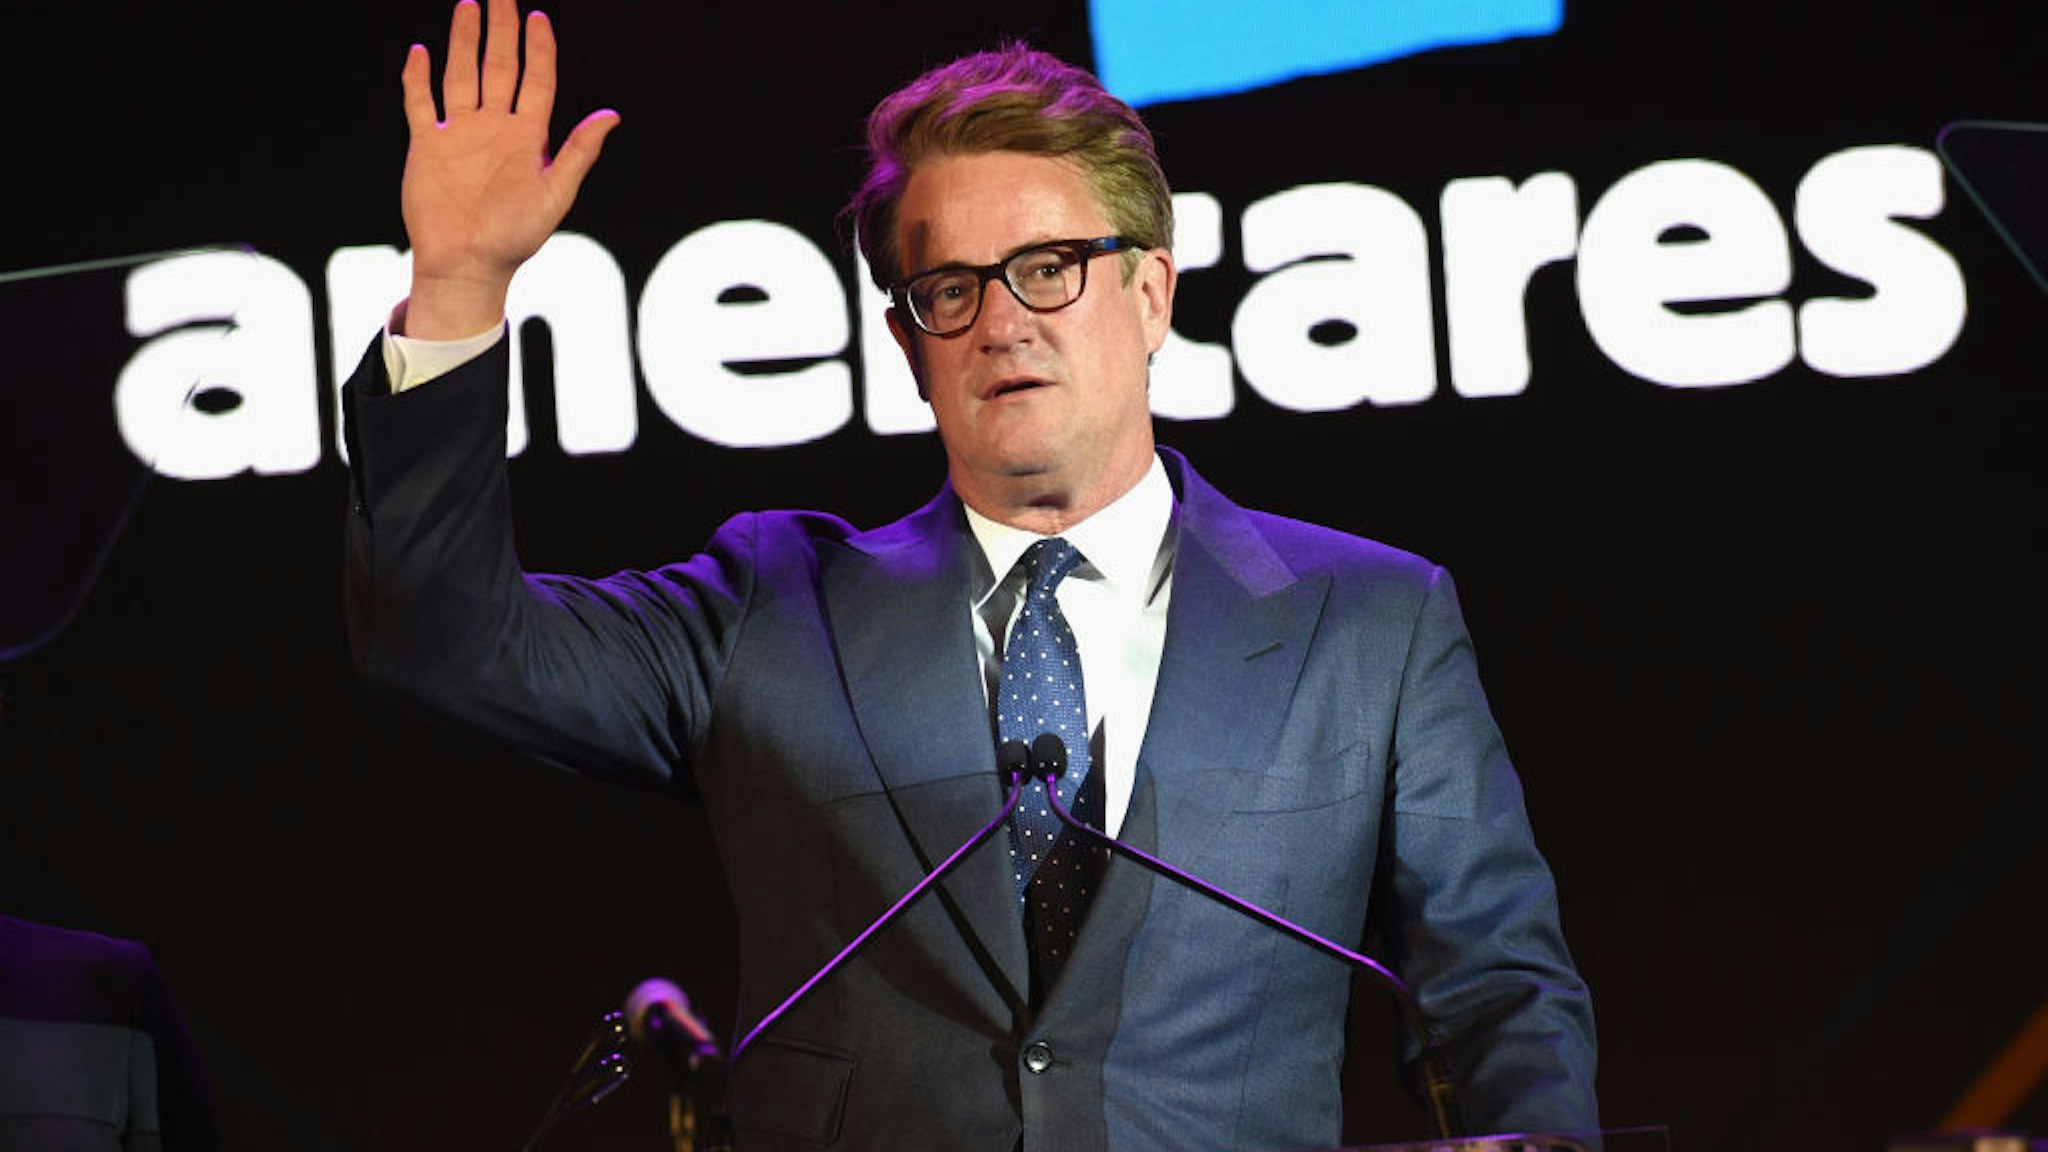 ARMONK, NY - OCTOBER 14: Co-host Joe Scarborough speaks onstage during the 2017 Americares Airlift Benefit at Westchester County Airport on October 14, 2017 in Armonk, New York. (Photo by Bryan Bedder/Getty Images for Americares)